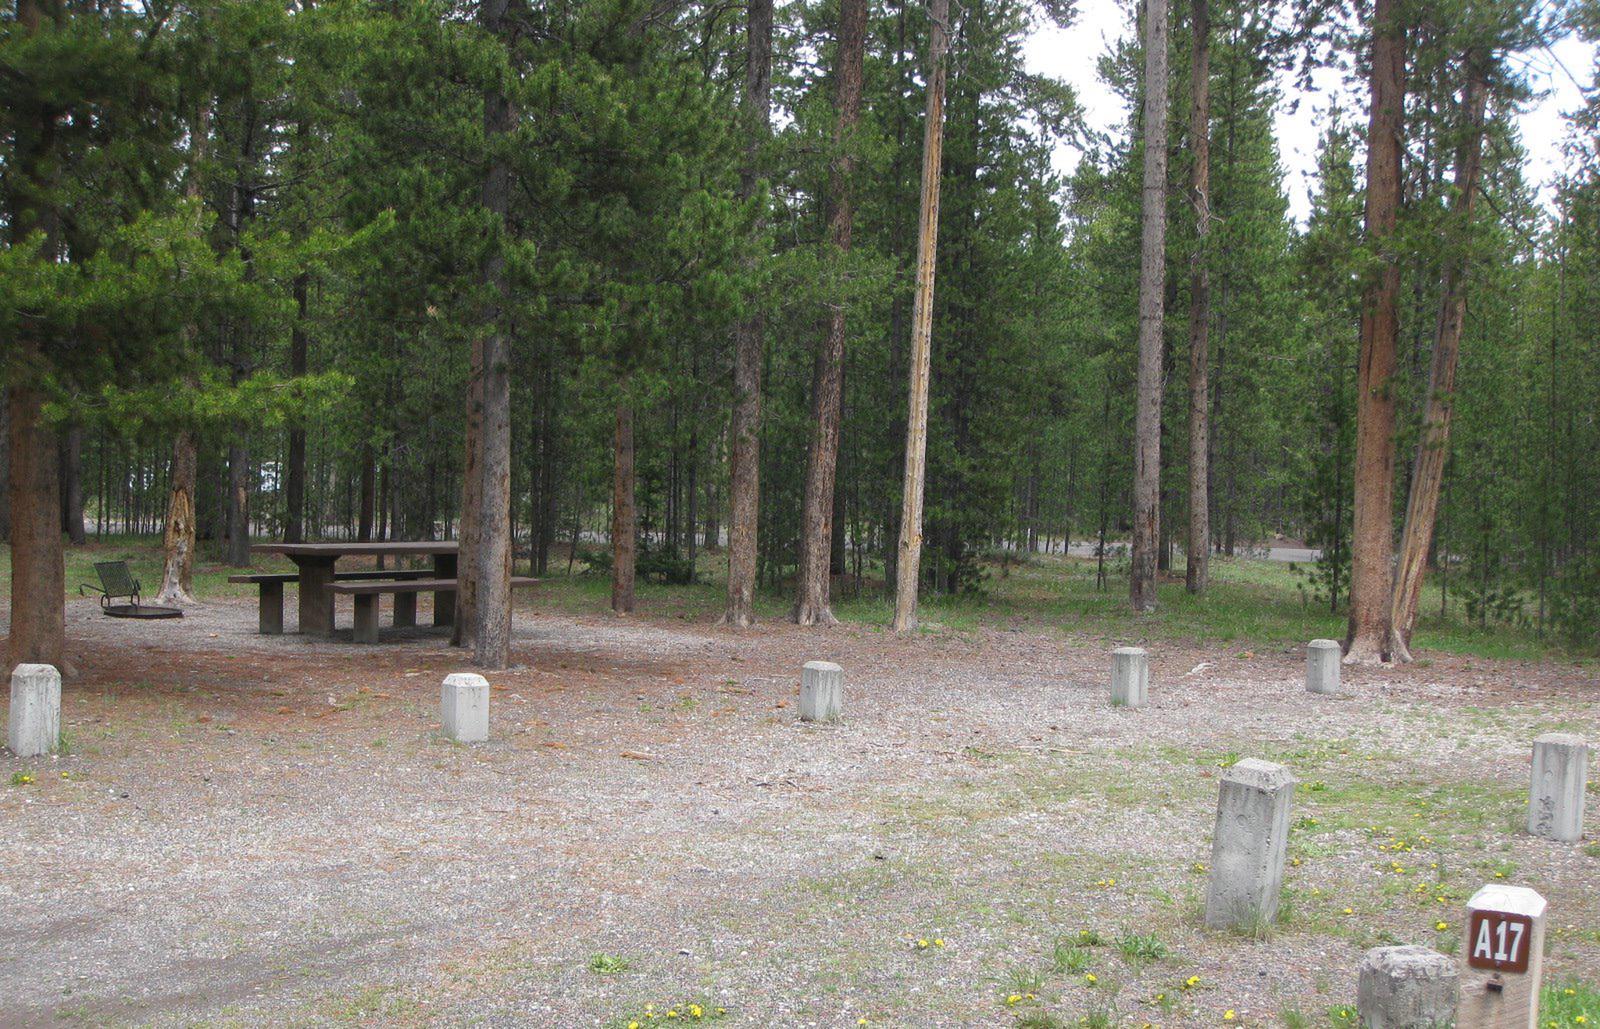 Site A17, surrounded by pine trees, picnic table & fire ringSite A17